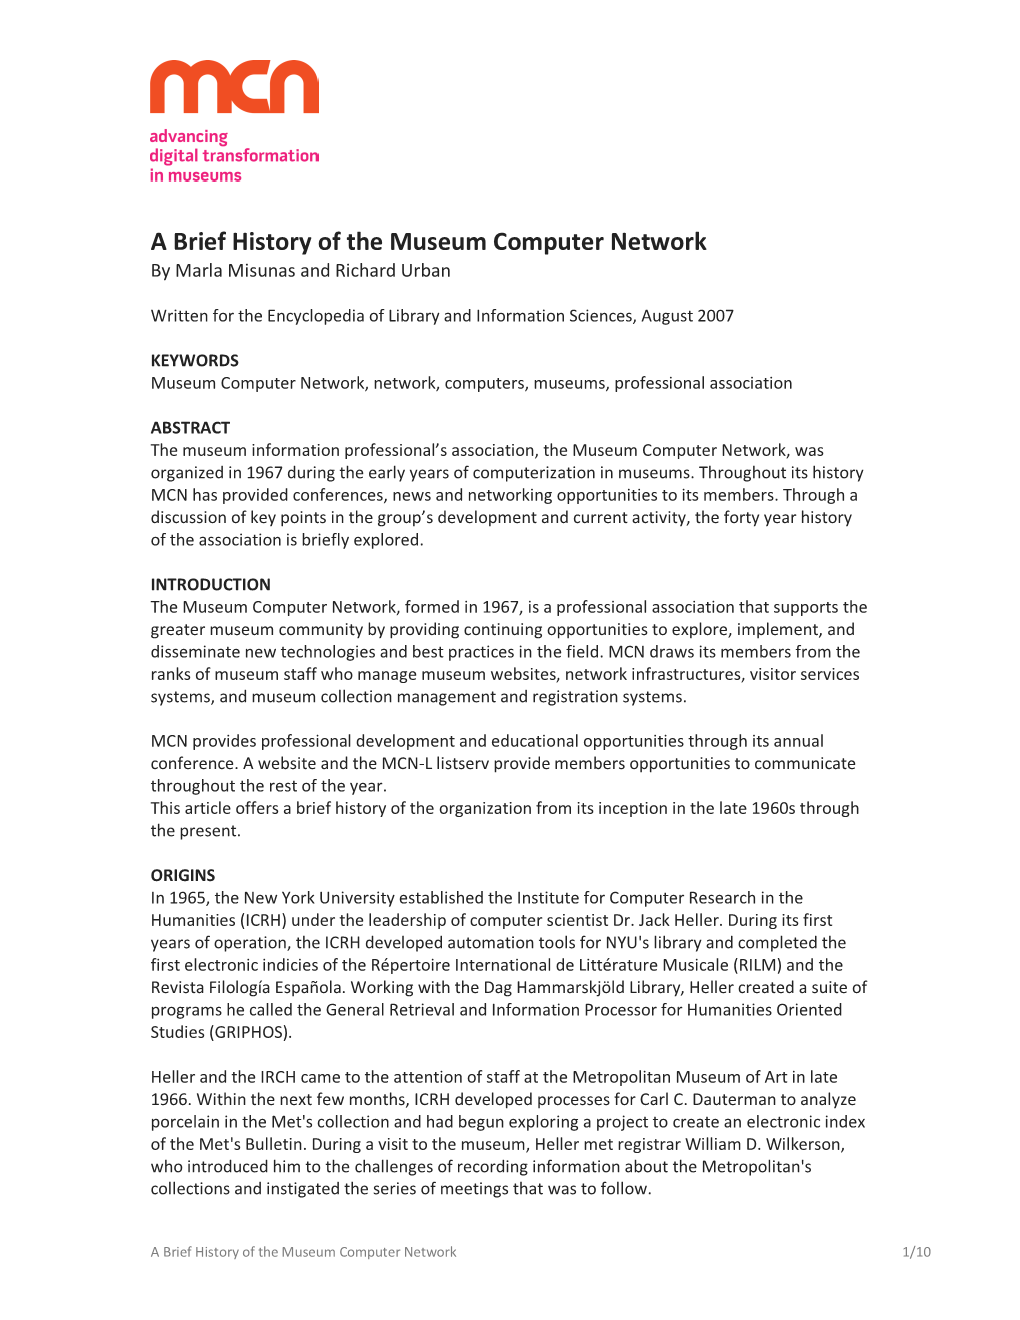 A Brief History of the Museum Computer Network by Marla Misunas and Richard Urban